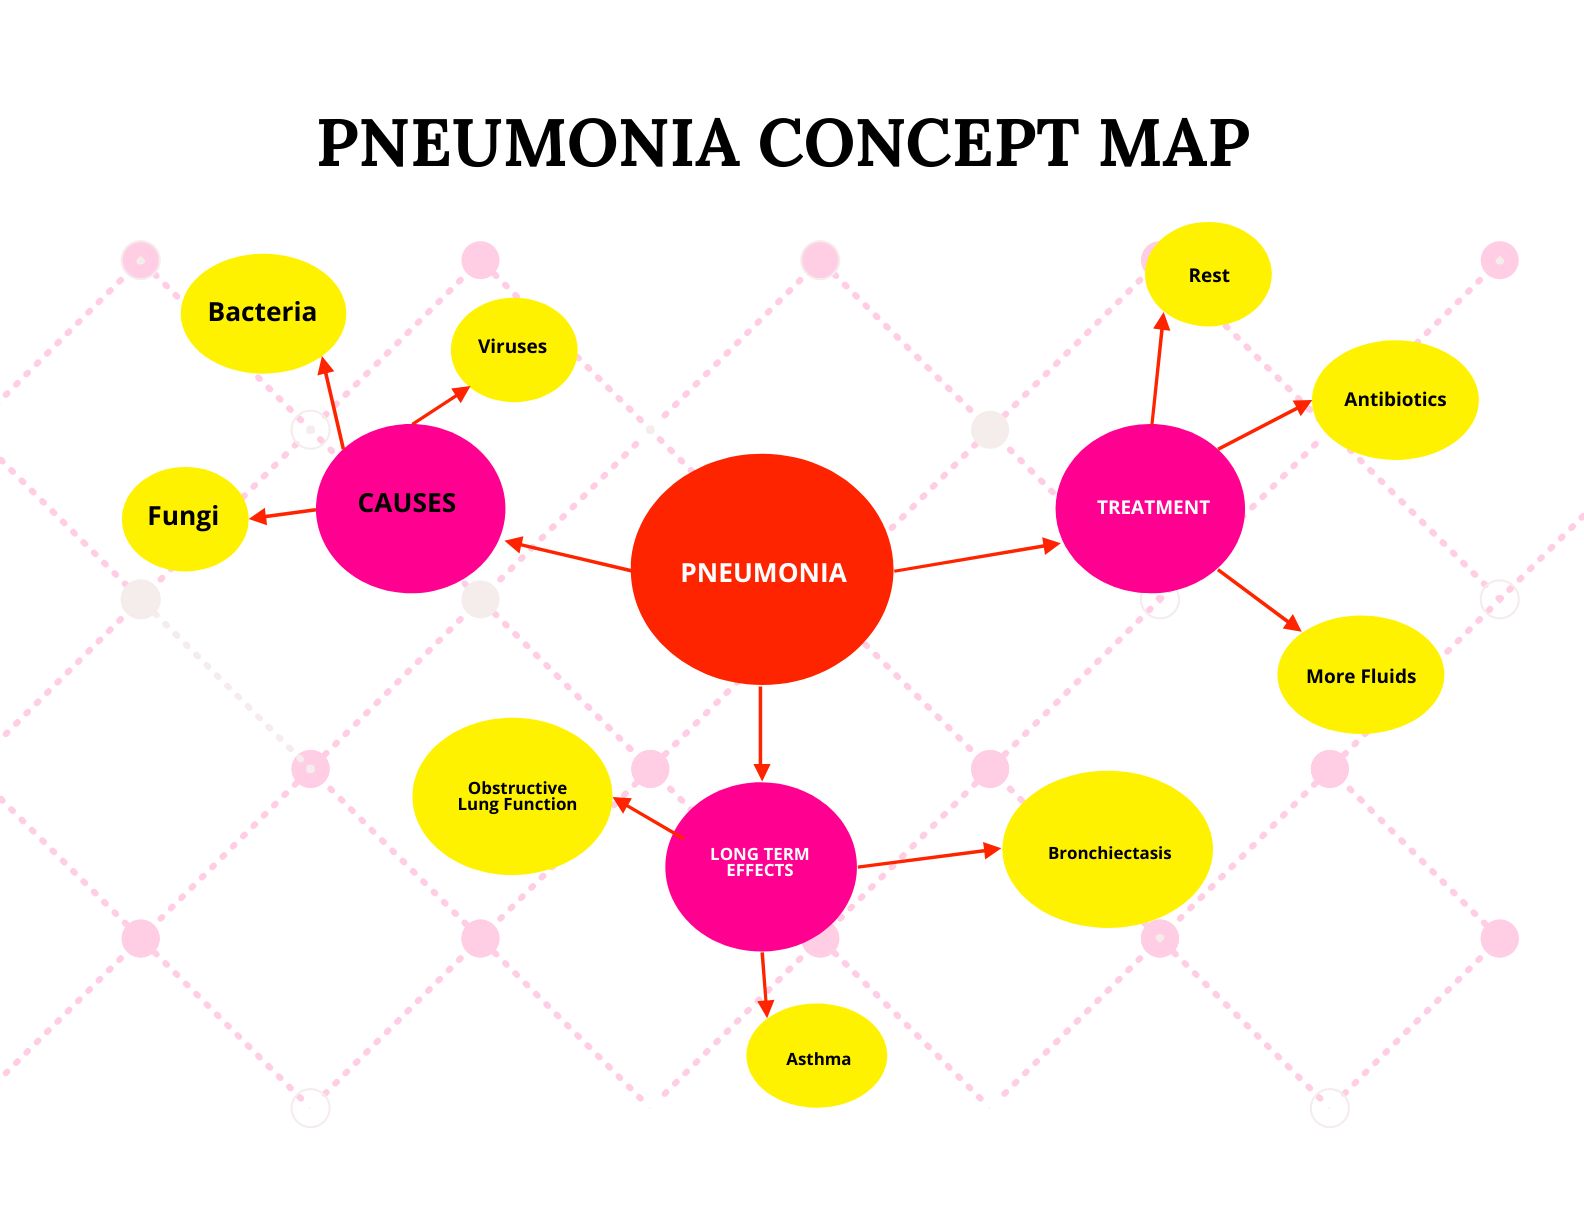 Free Pneumonia Concept Map Template Download in Word, Google Docs